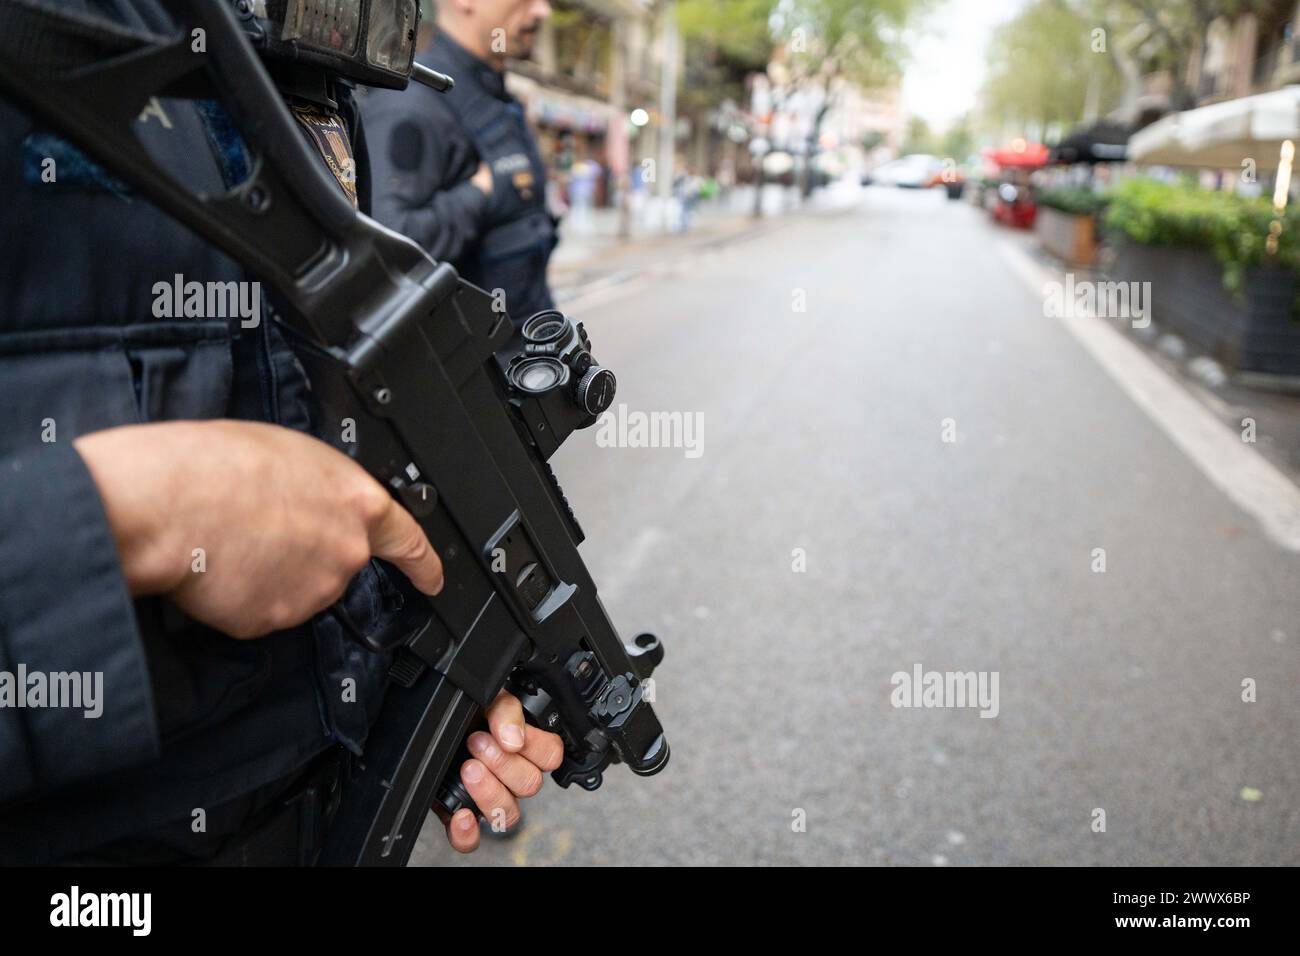 Barcelona, Spain. 26th Mar, 2024. Police presence is being reinforced at emblematic locations in Barcelona like the Sagrada Familia due to the alert for terrorist attacks in Spain following the Moscow attack. Se refuerza la presencia policial en lugares emblemáticos de Barcelona como la Sagrada Familia debido a la alerta por atentados terroristas en Espa&#xf1;a tras el atentado de Mosc&#xfa; in the pic: News Politics - Barcelona, Spain - Tuesday March 26, 2024 (Photo by Eric Renom/LaPresse) Credit: LaPresse/Alamy Live News Stock Photo